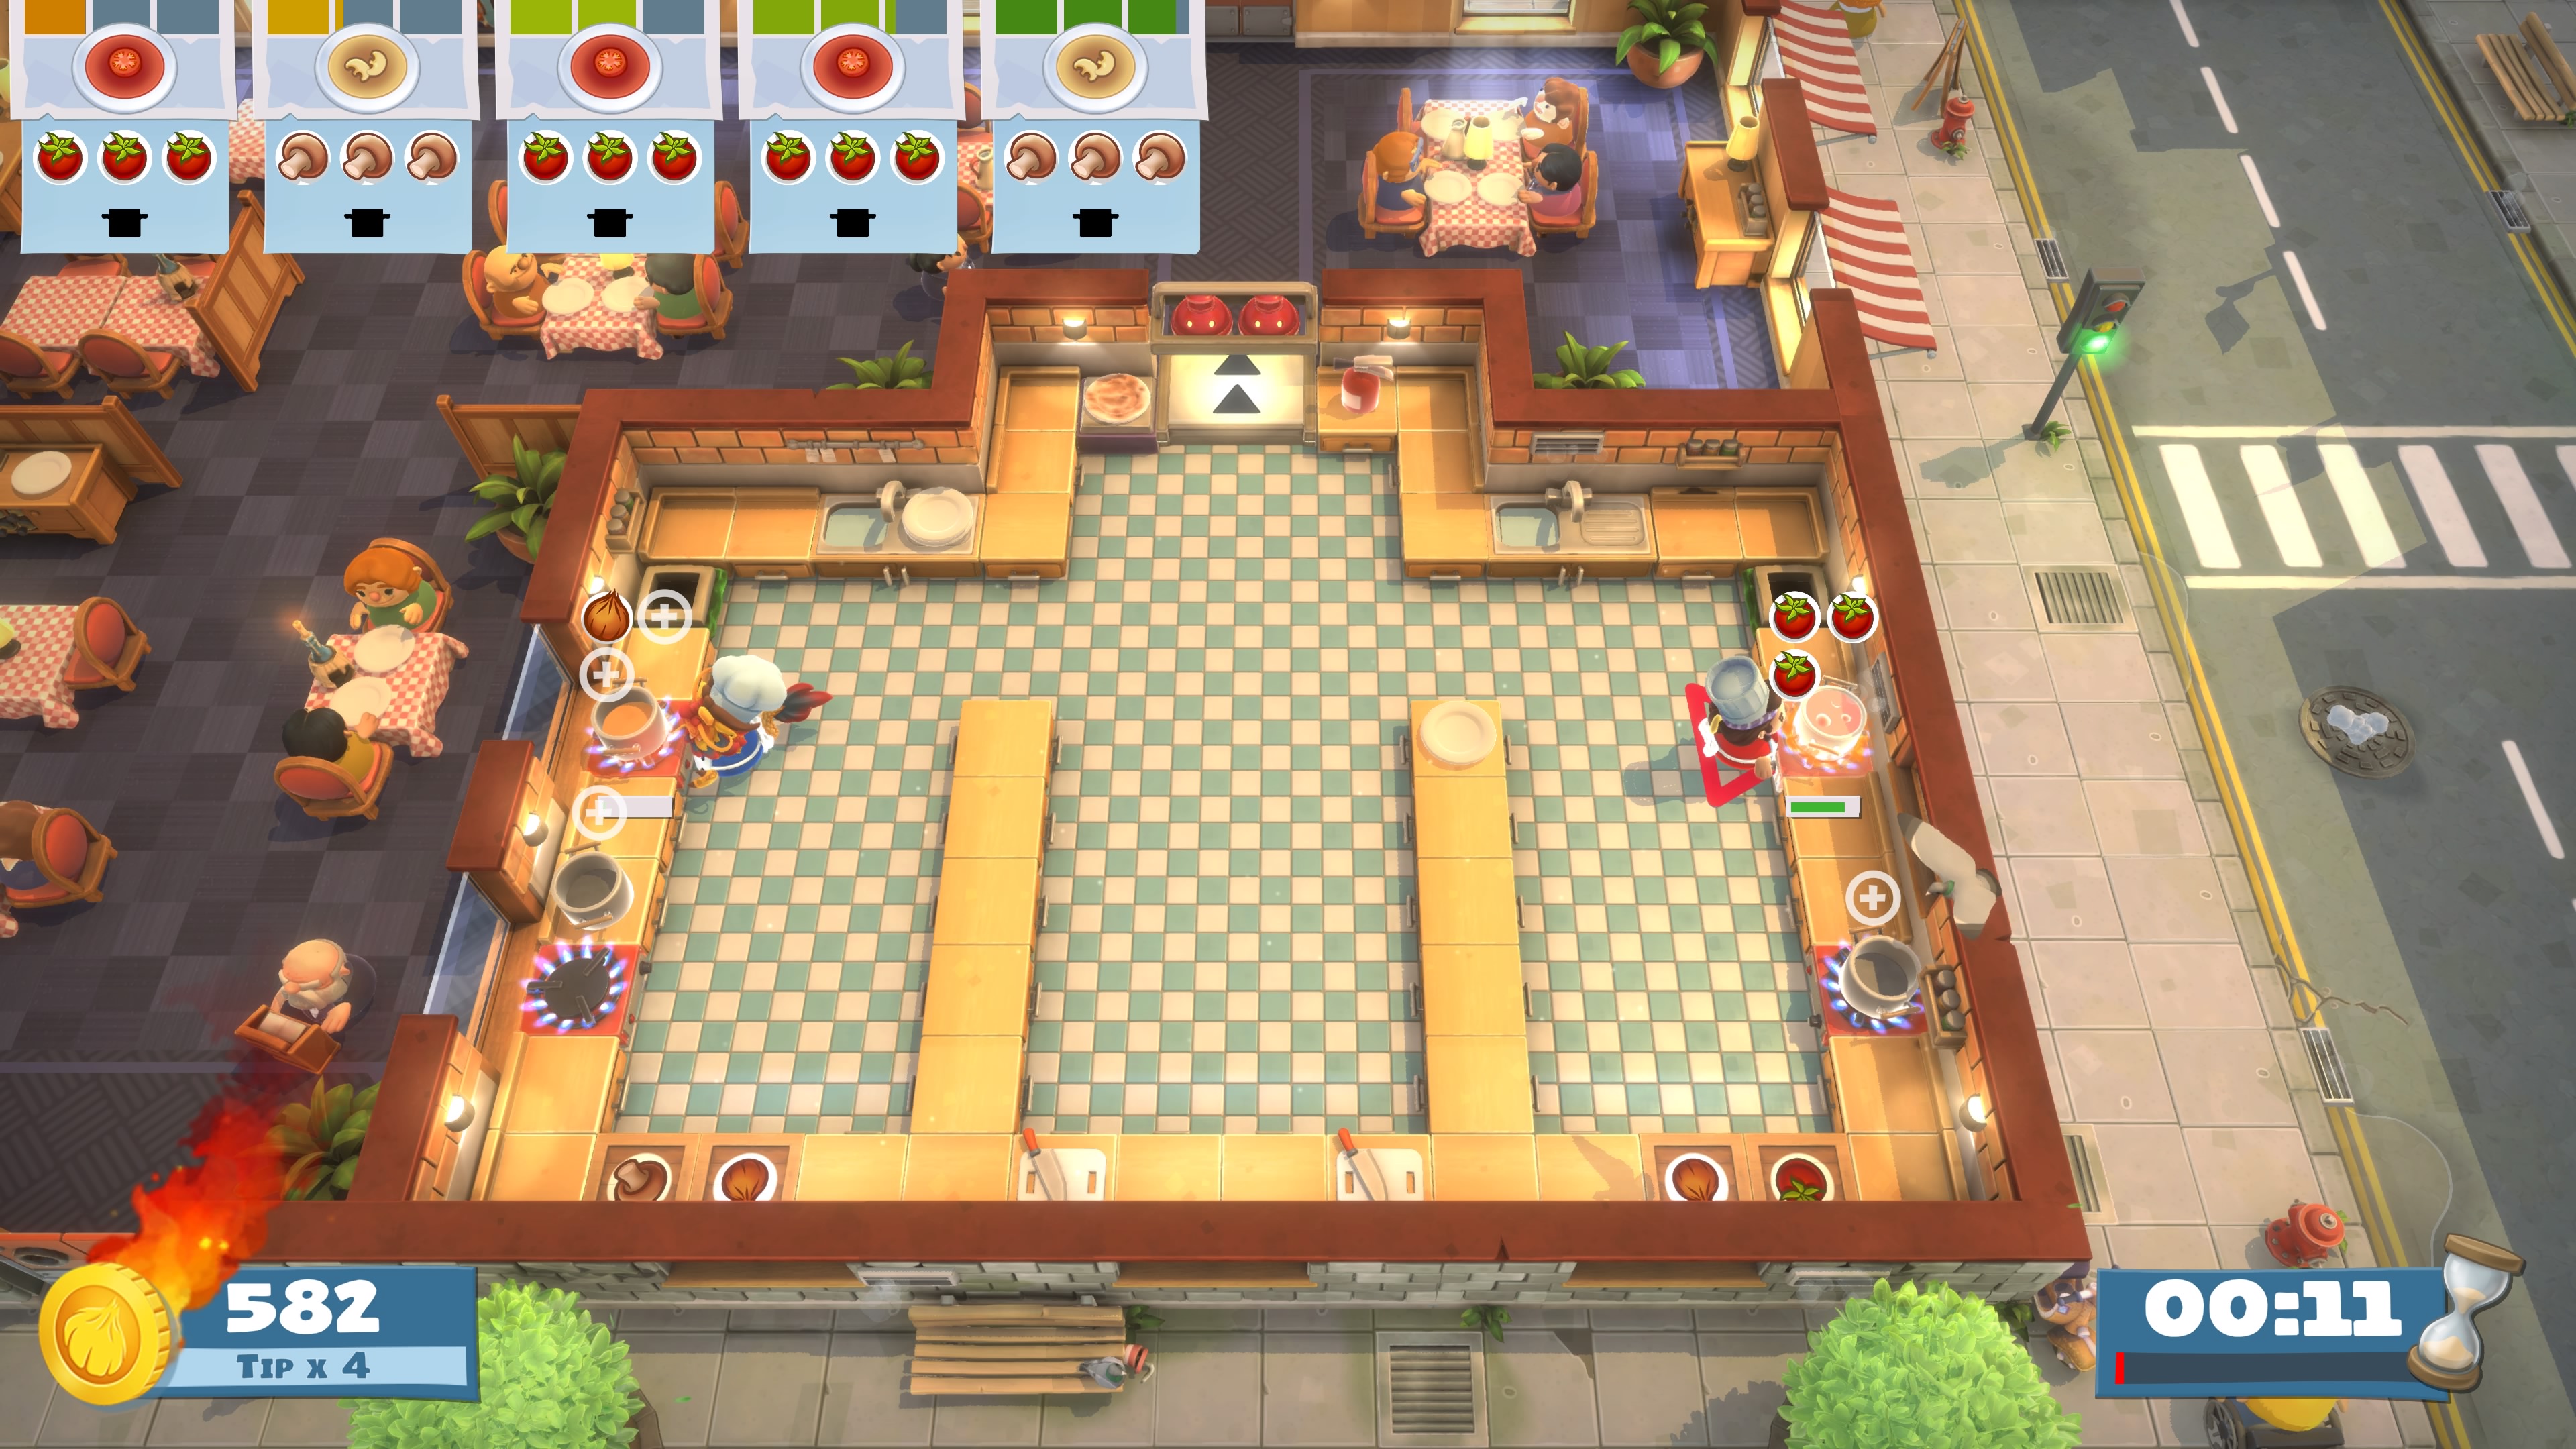 Everything new in Overcooked All You Can Eat